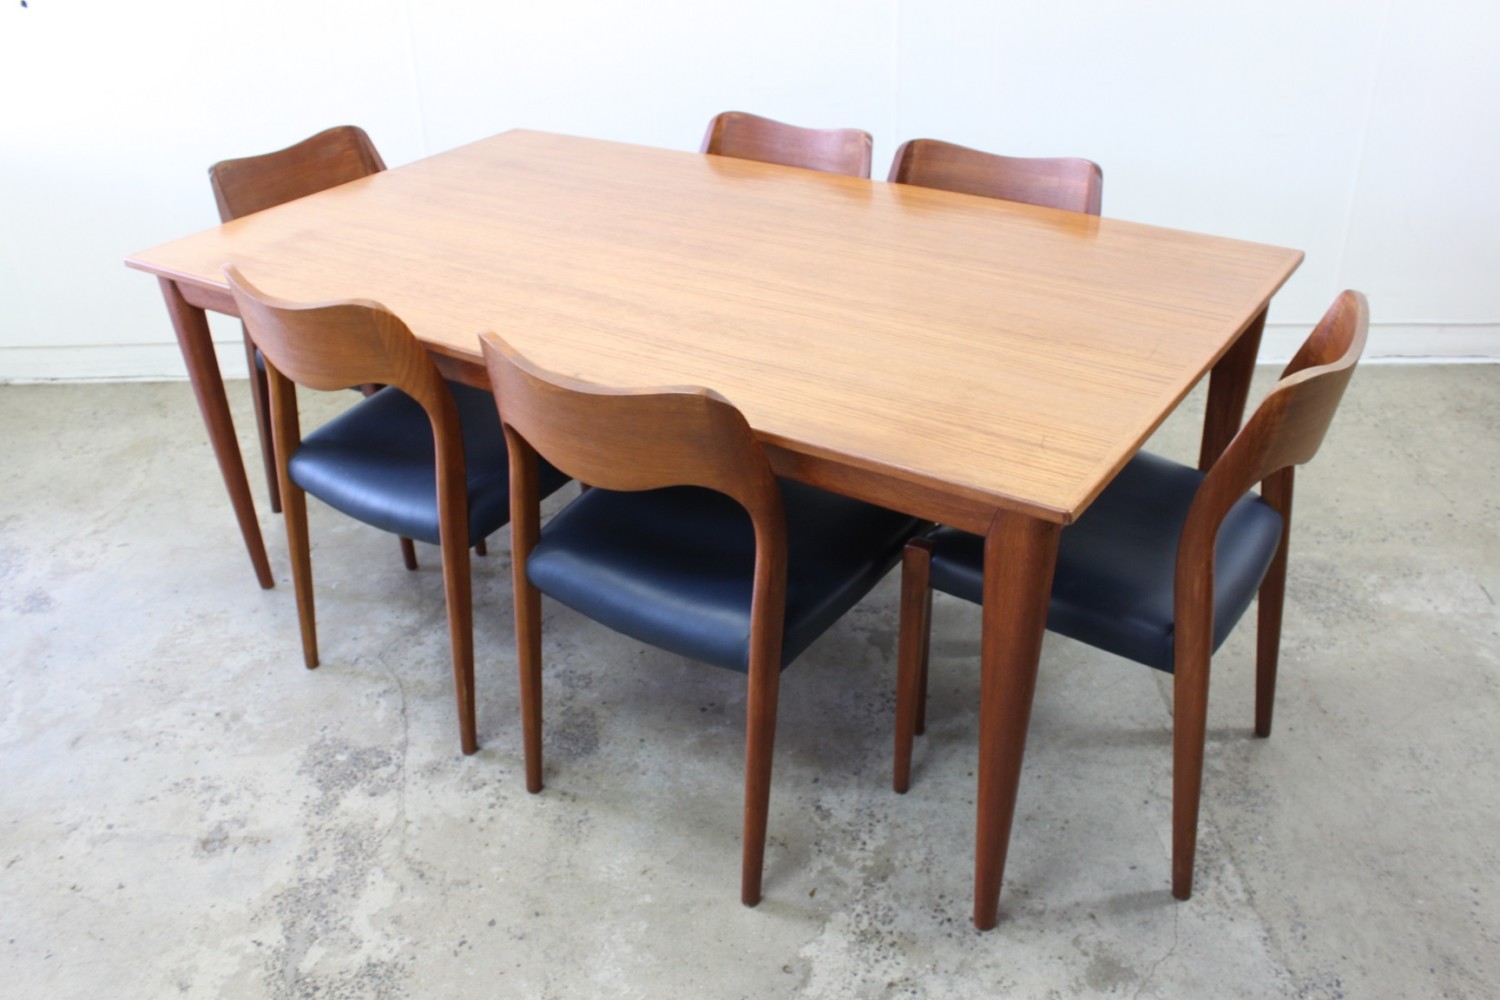 Niels Moller Dining Table